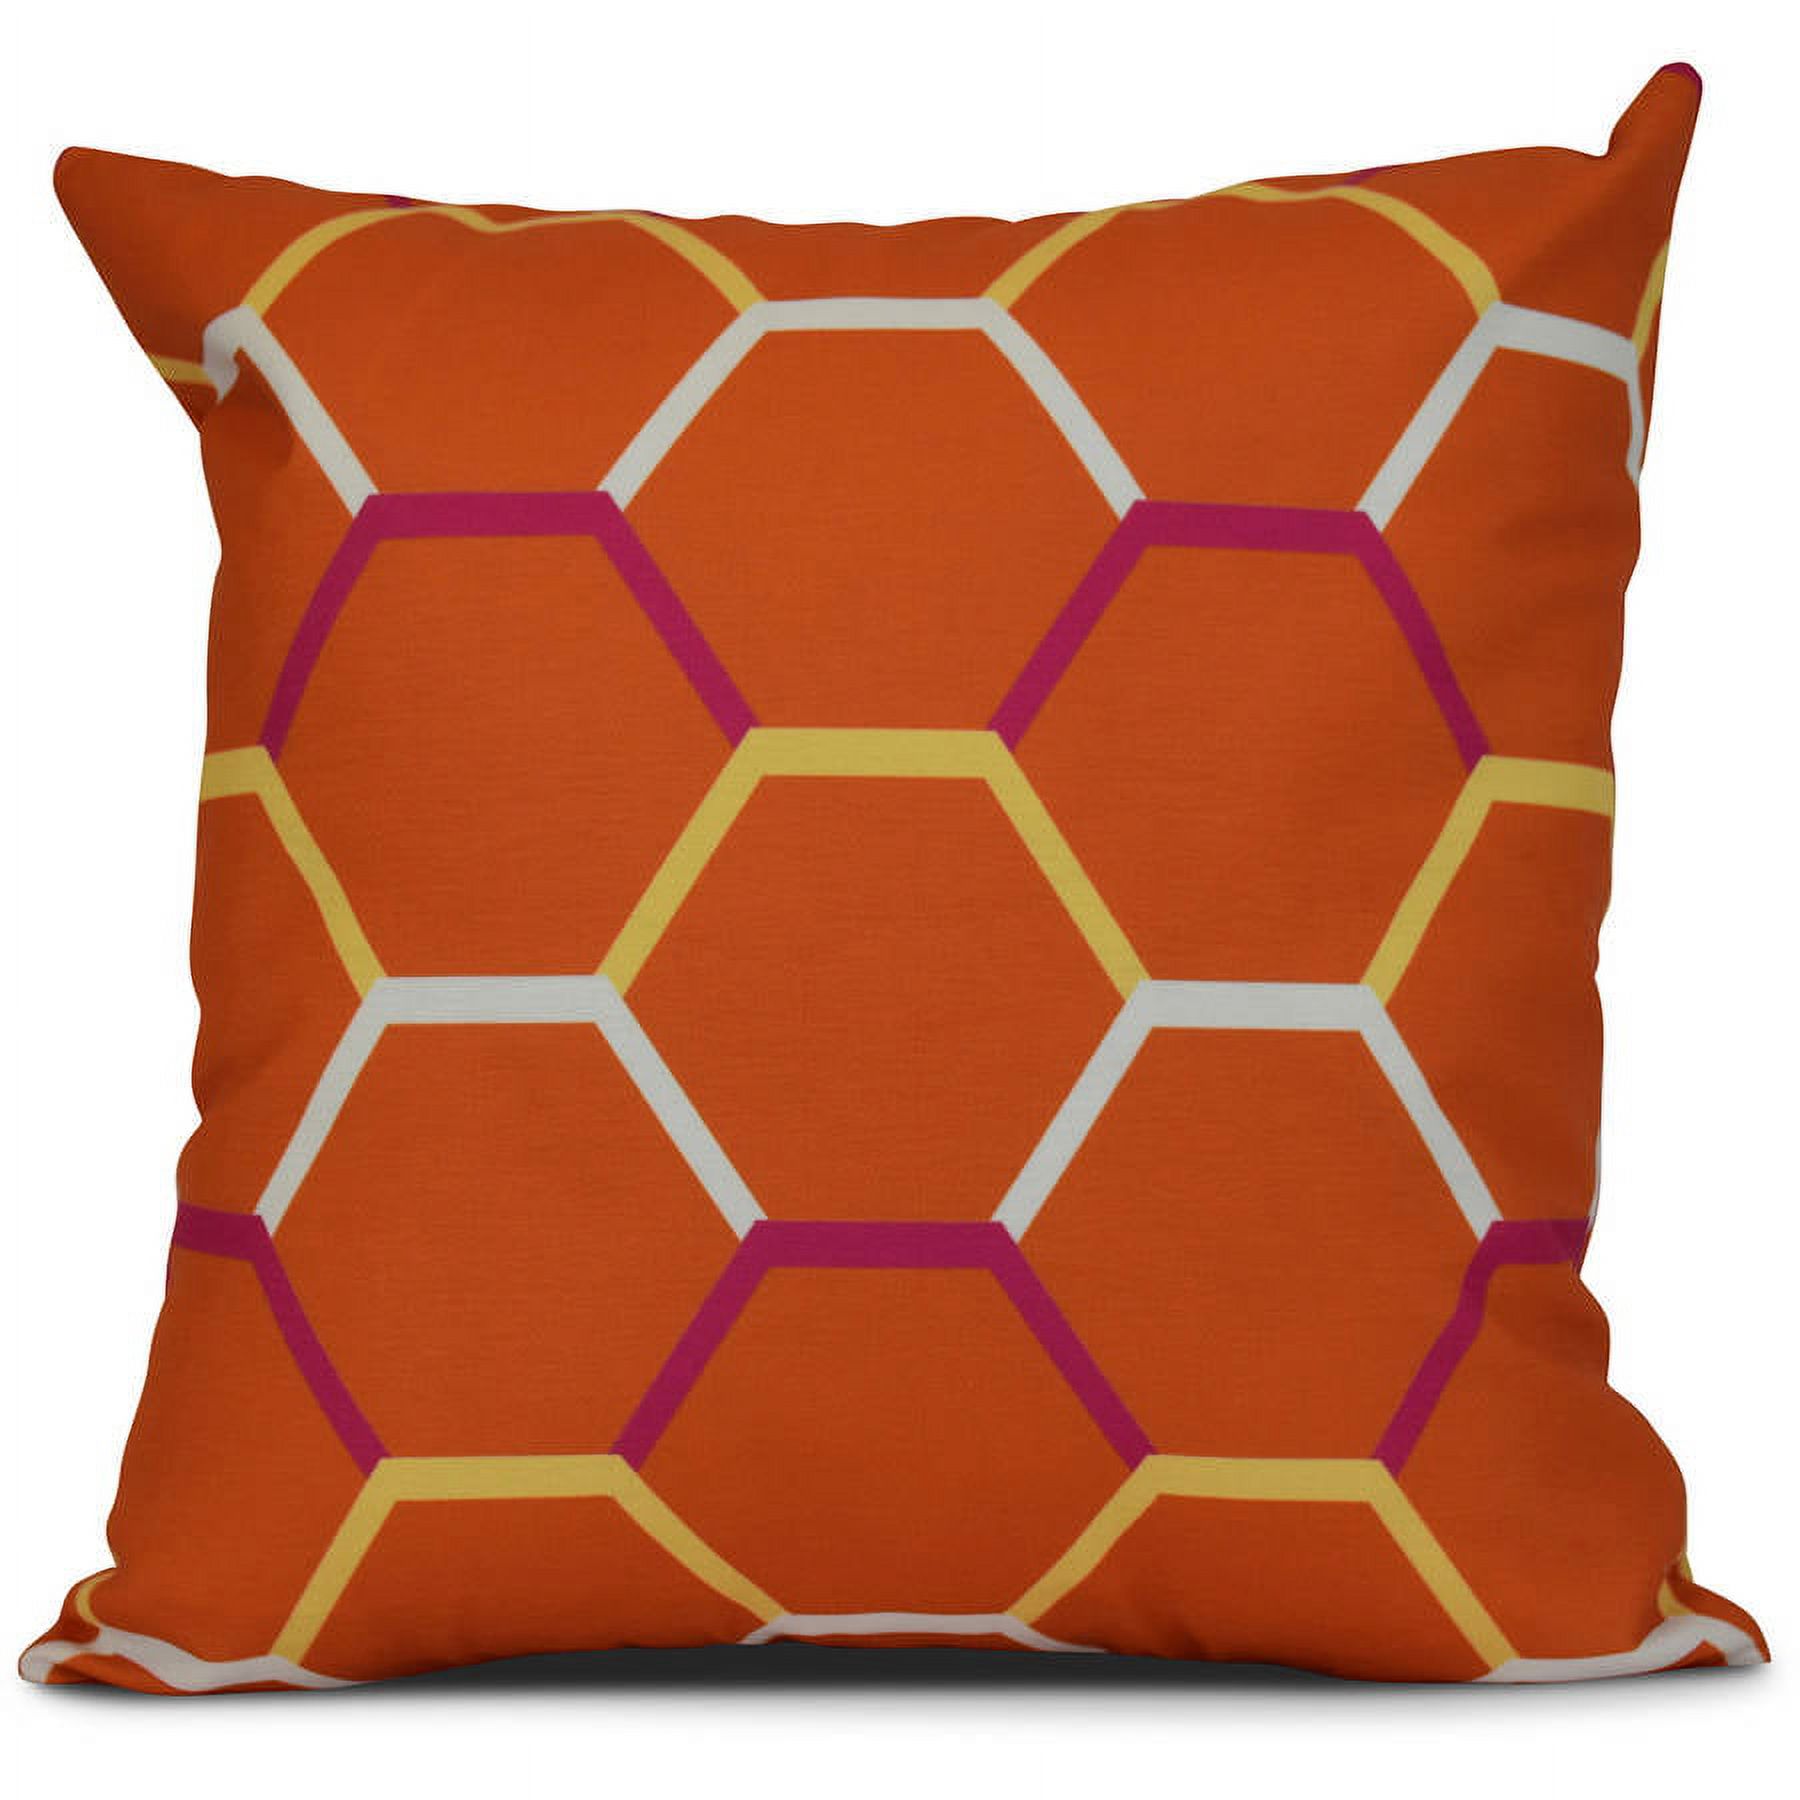 Simply Daisy, Cool Shades, Geometric Print Outdoor Pillow - image 1 of 2